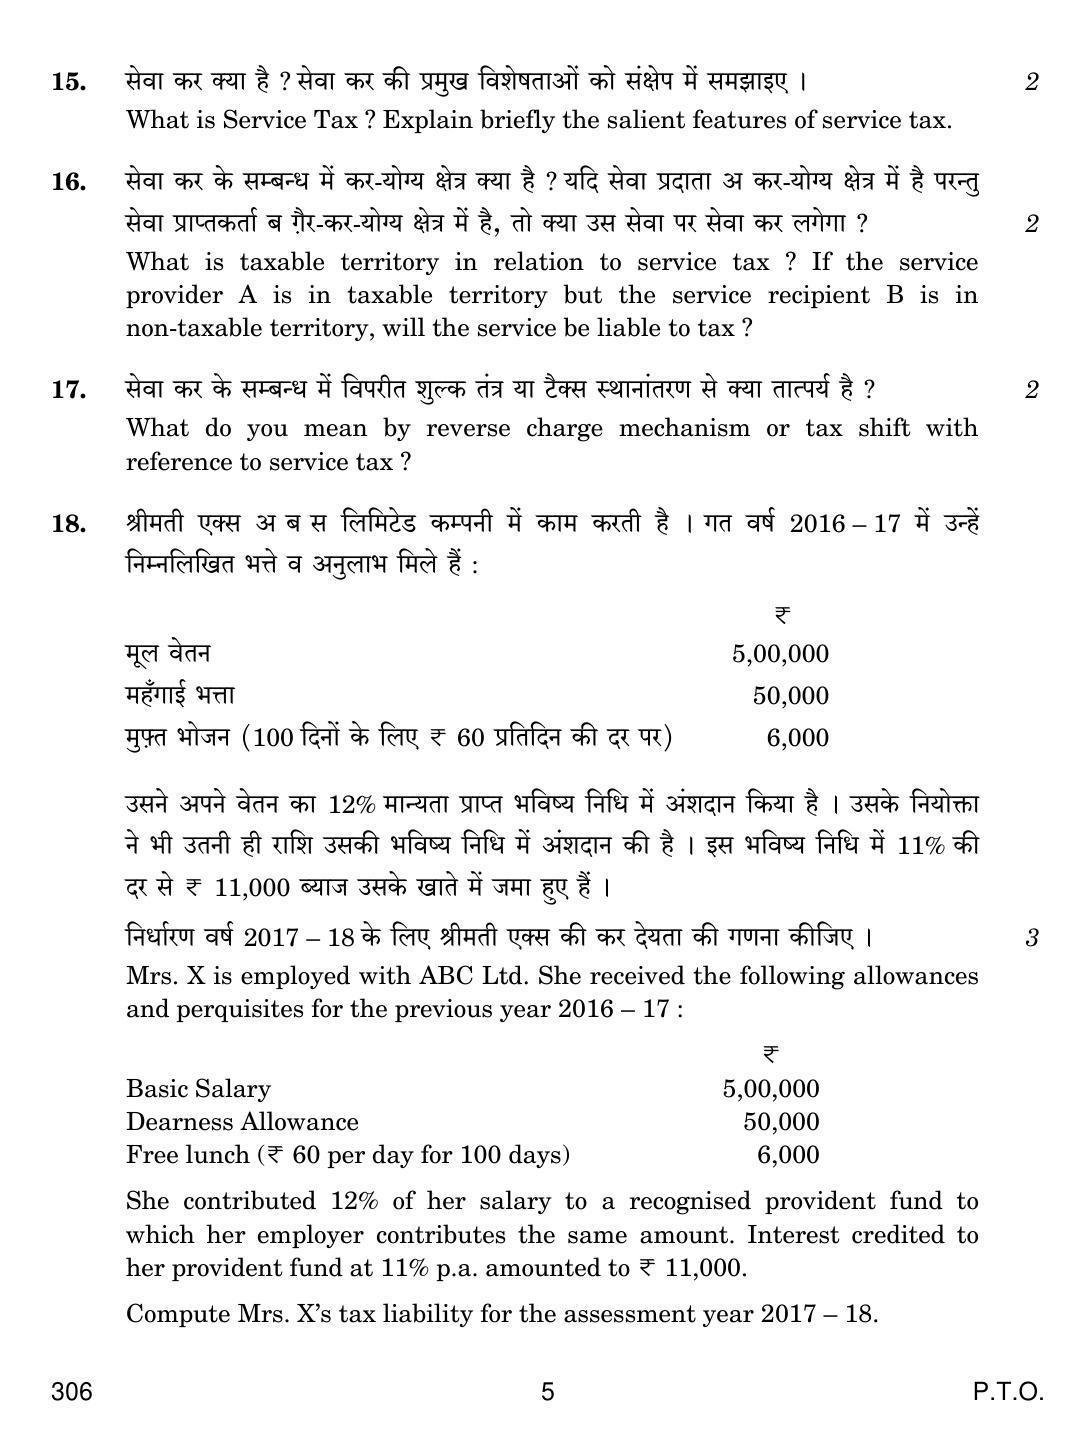 CBSE Class 12 306 TAXATION 2018 Question Paper - Page 5